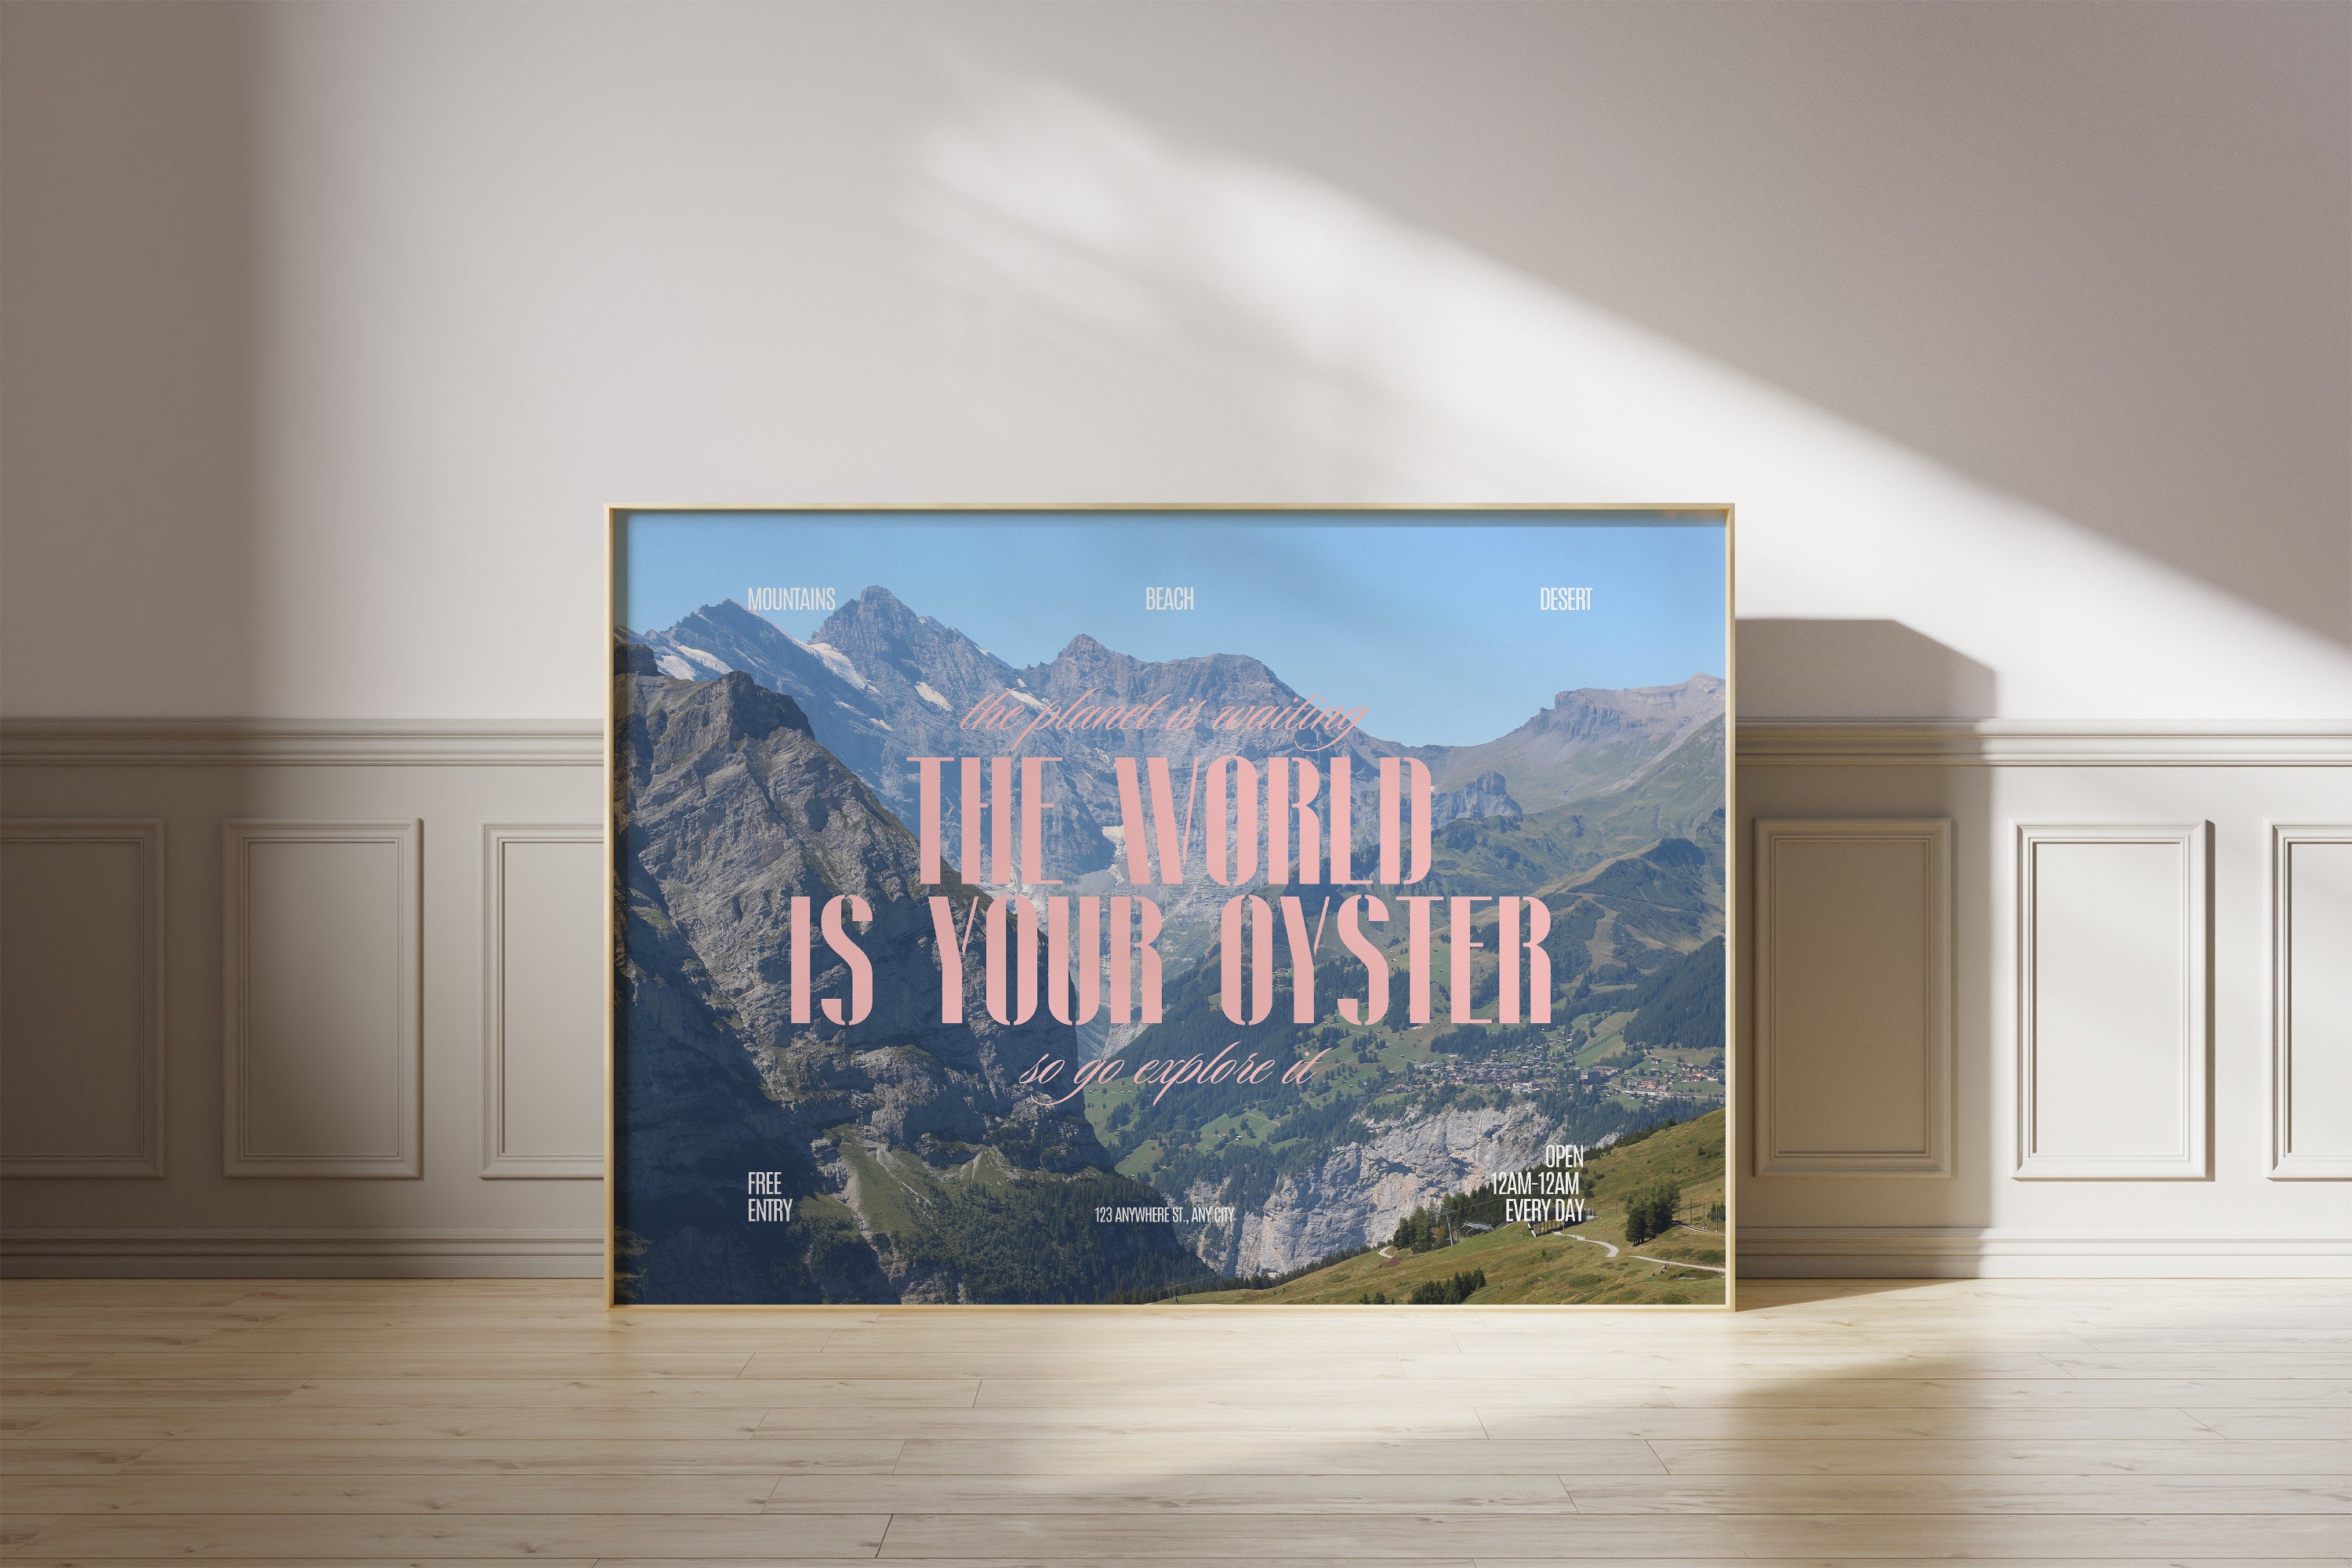 The World Is Your Oyster,Digital Art Prints,Out of Office Wall Art,Retro Photograph Prints,Retro Photo Art Print,Preppy Art,Trendy Art Print